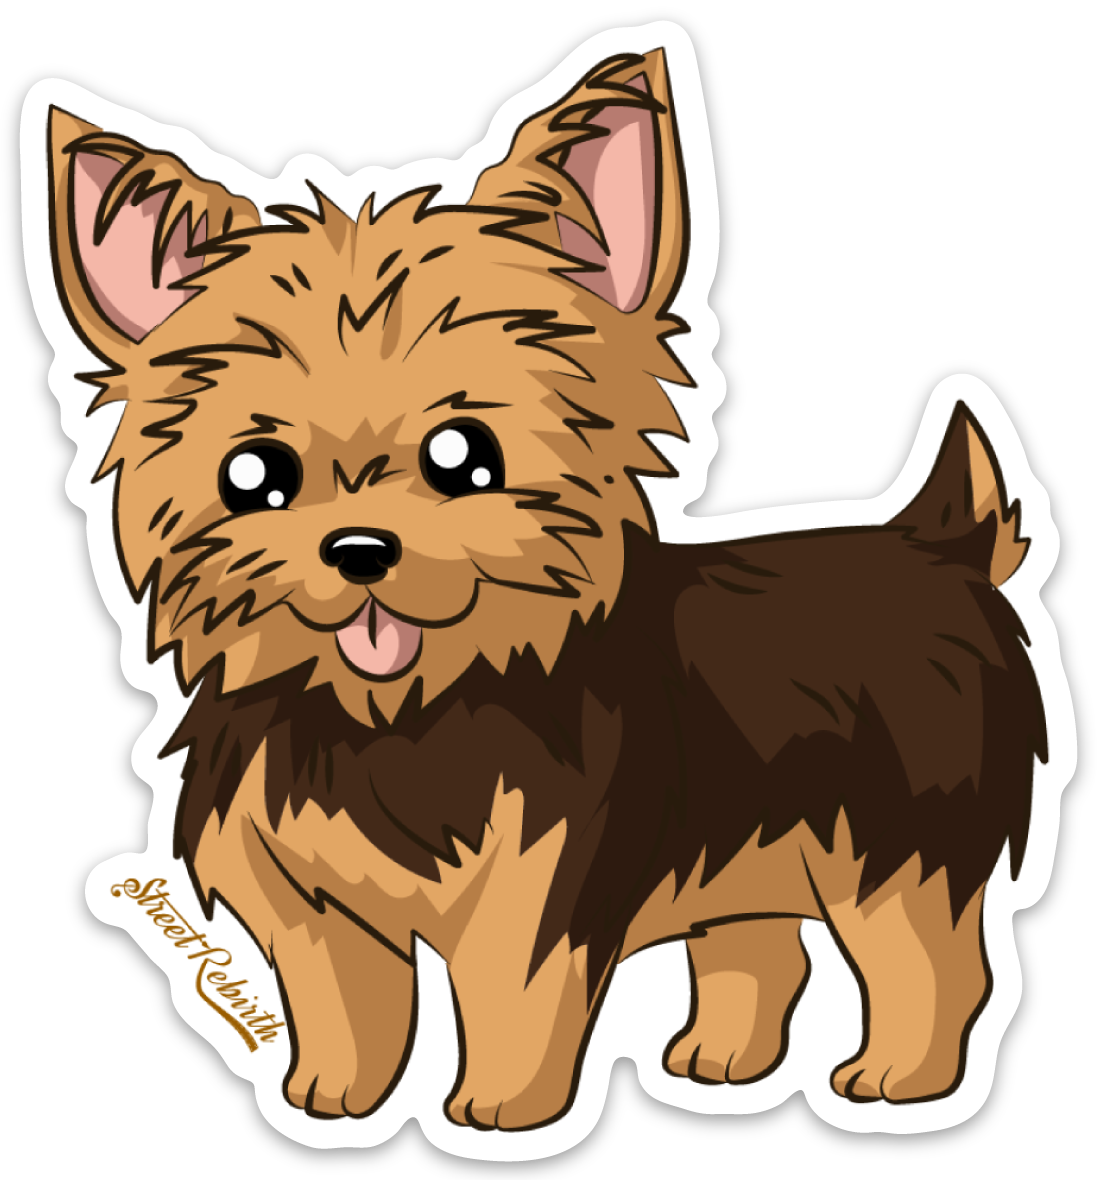 Yorki Dog PUN STICKER – ONE 4 INCH WATER PROOF VINYL STICKER – FOR HYDRO FLASK, SKATEBOARD, LAPTOP, PLANNER, CAR, COLLECTING, GIFTING